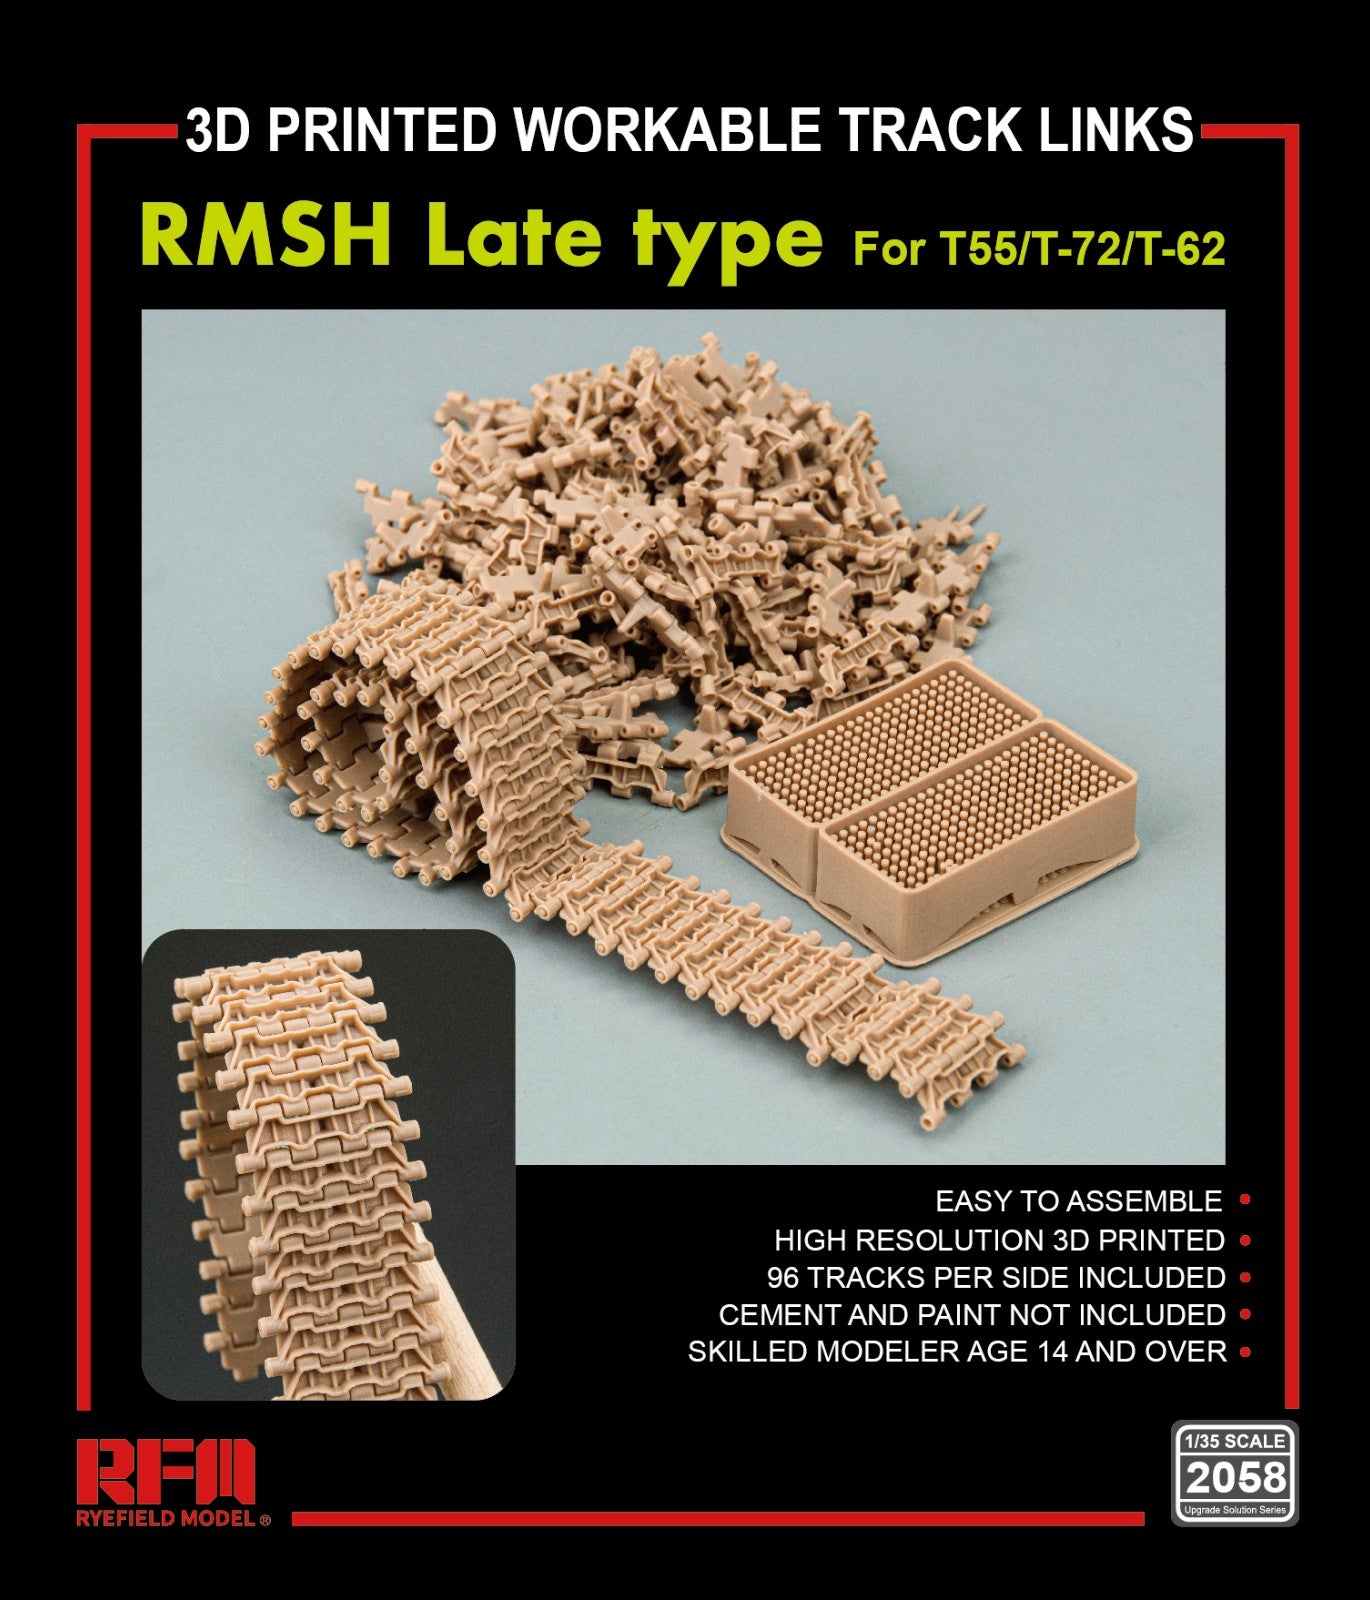 RFM: 1/35 RMSH Late Type 3D Printed Workable Track Links for T55/T-72/T-62